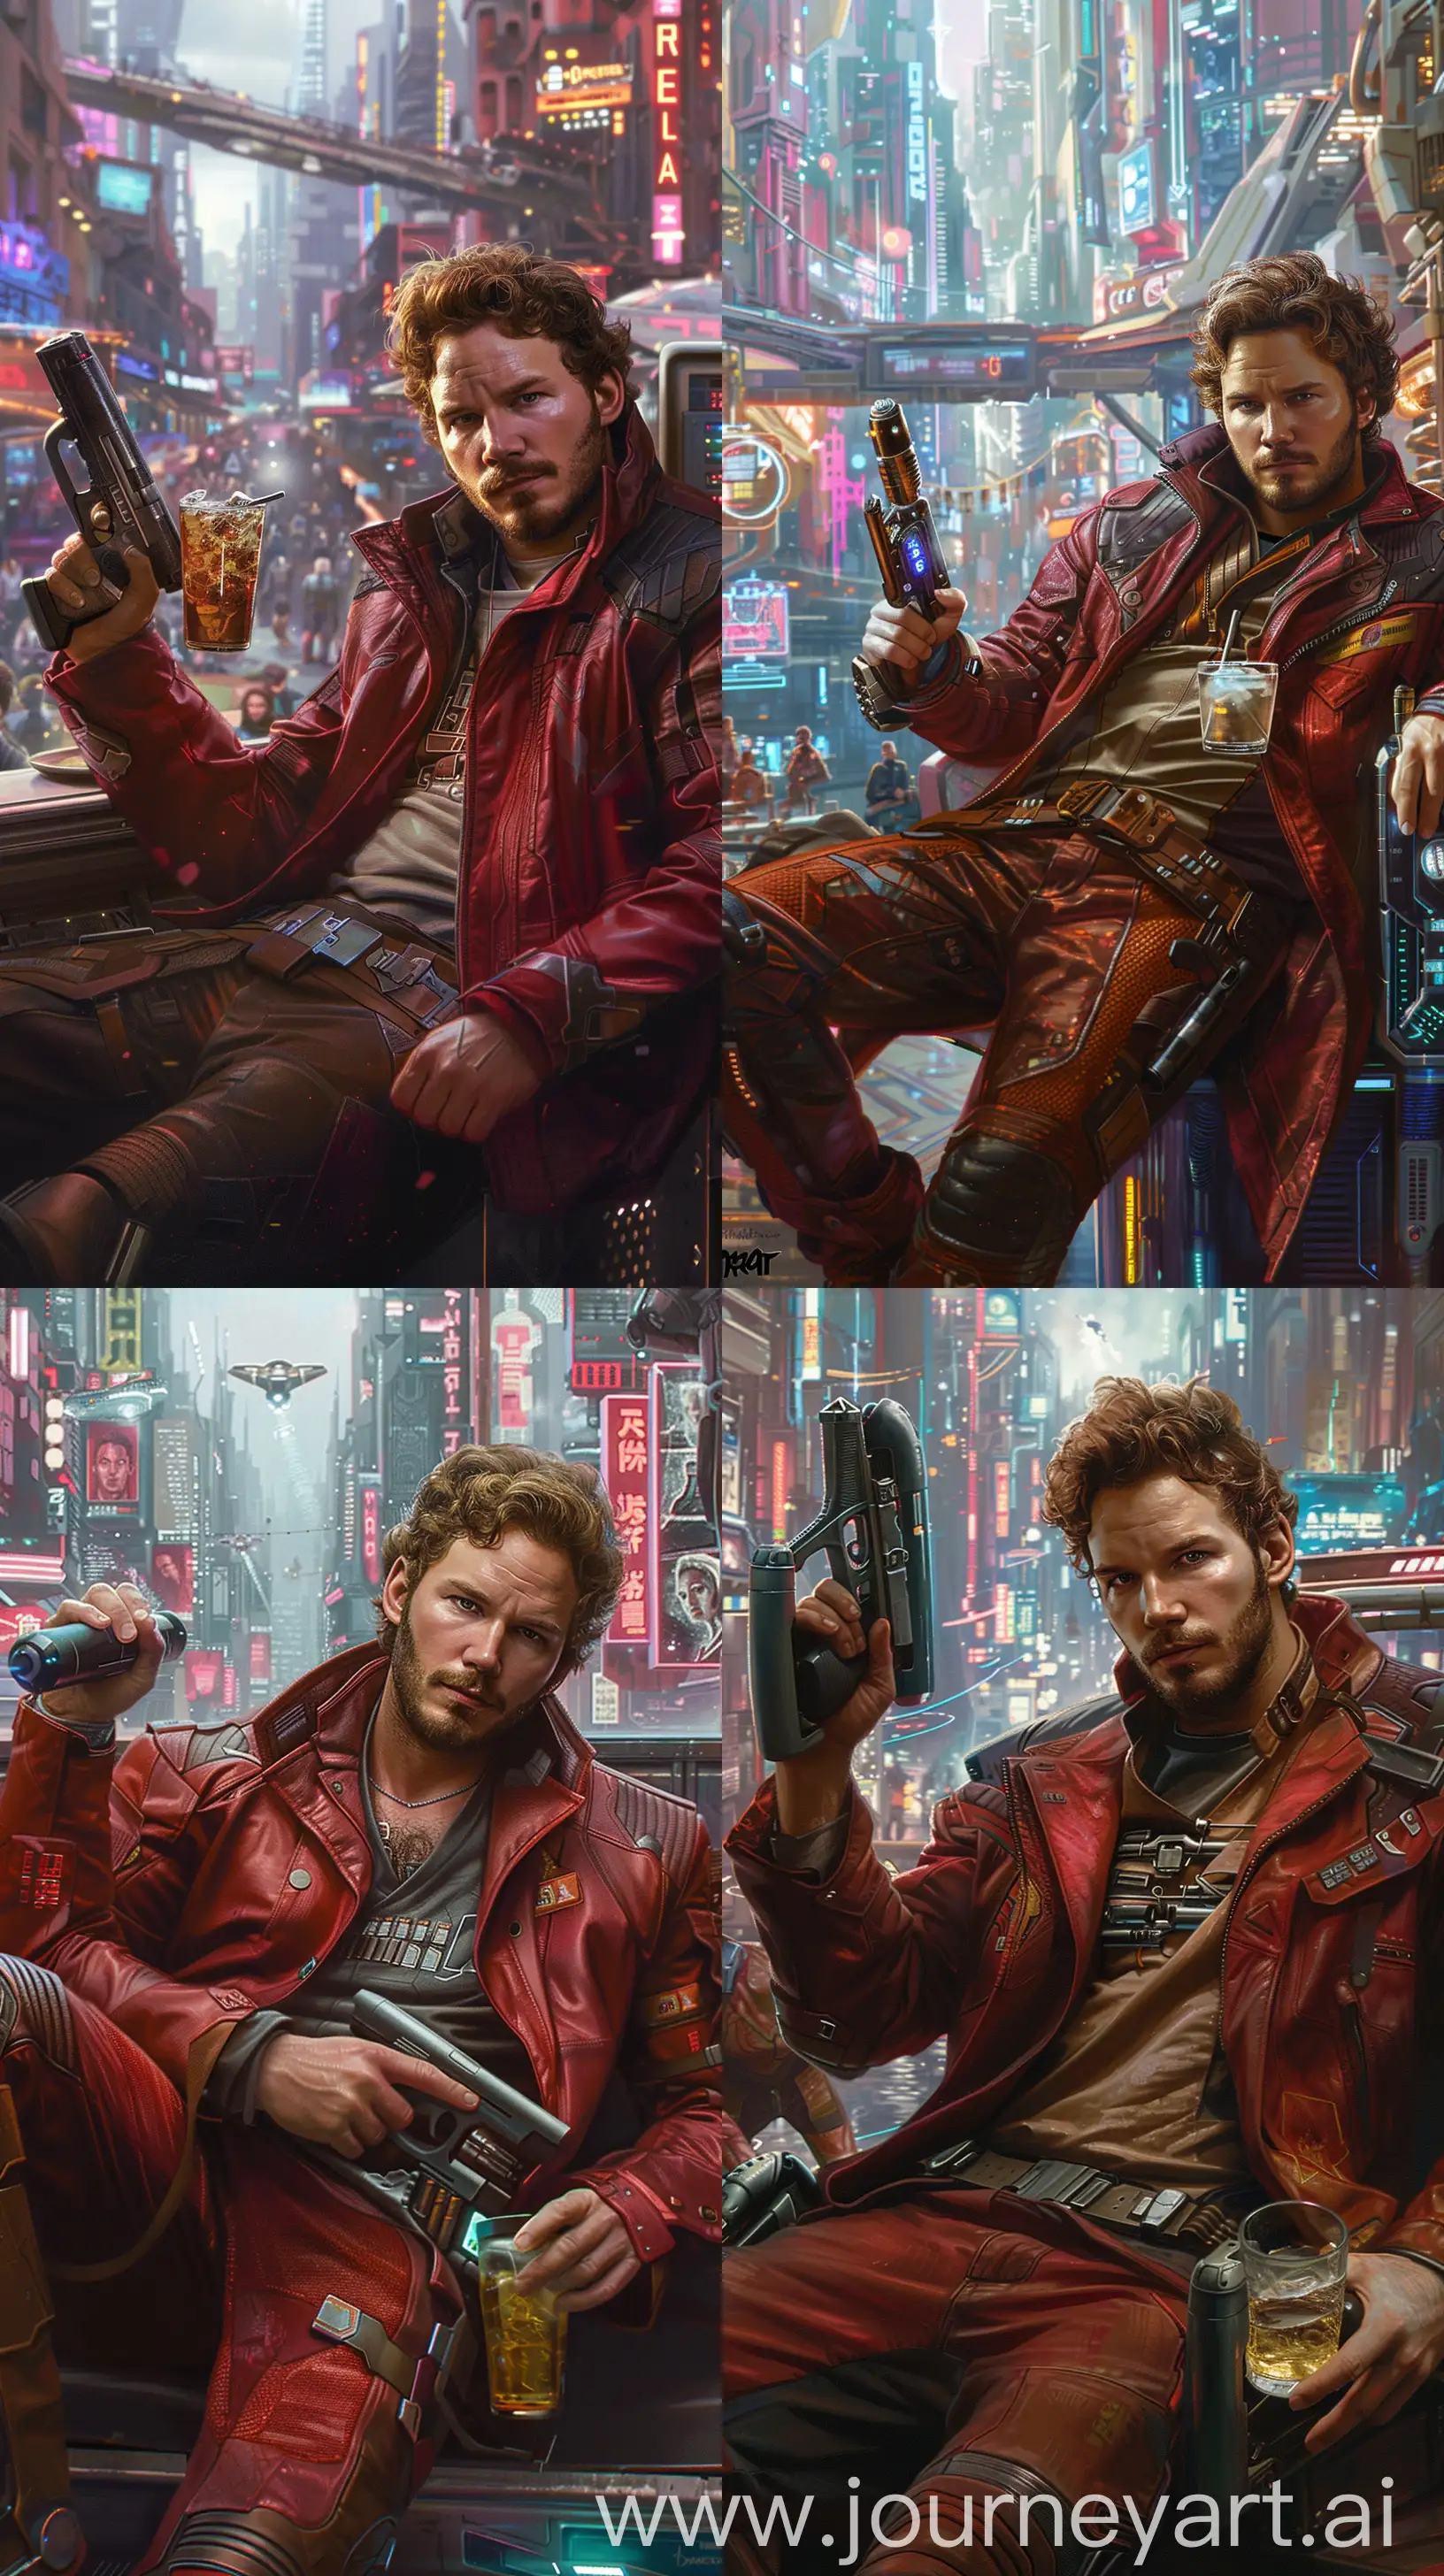 StarLord-in-Cyberpunk-City-BrownHaired-Hero-with-Blaster-and-Drink